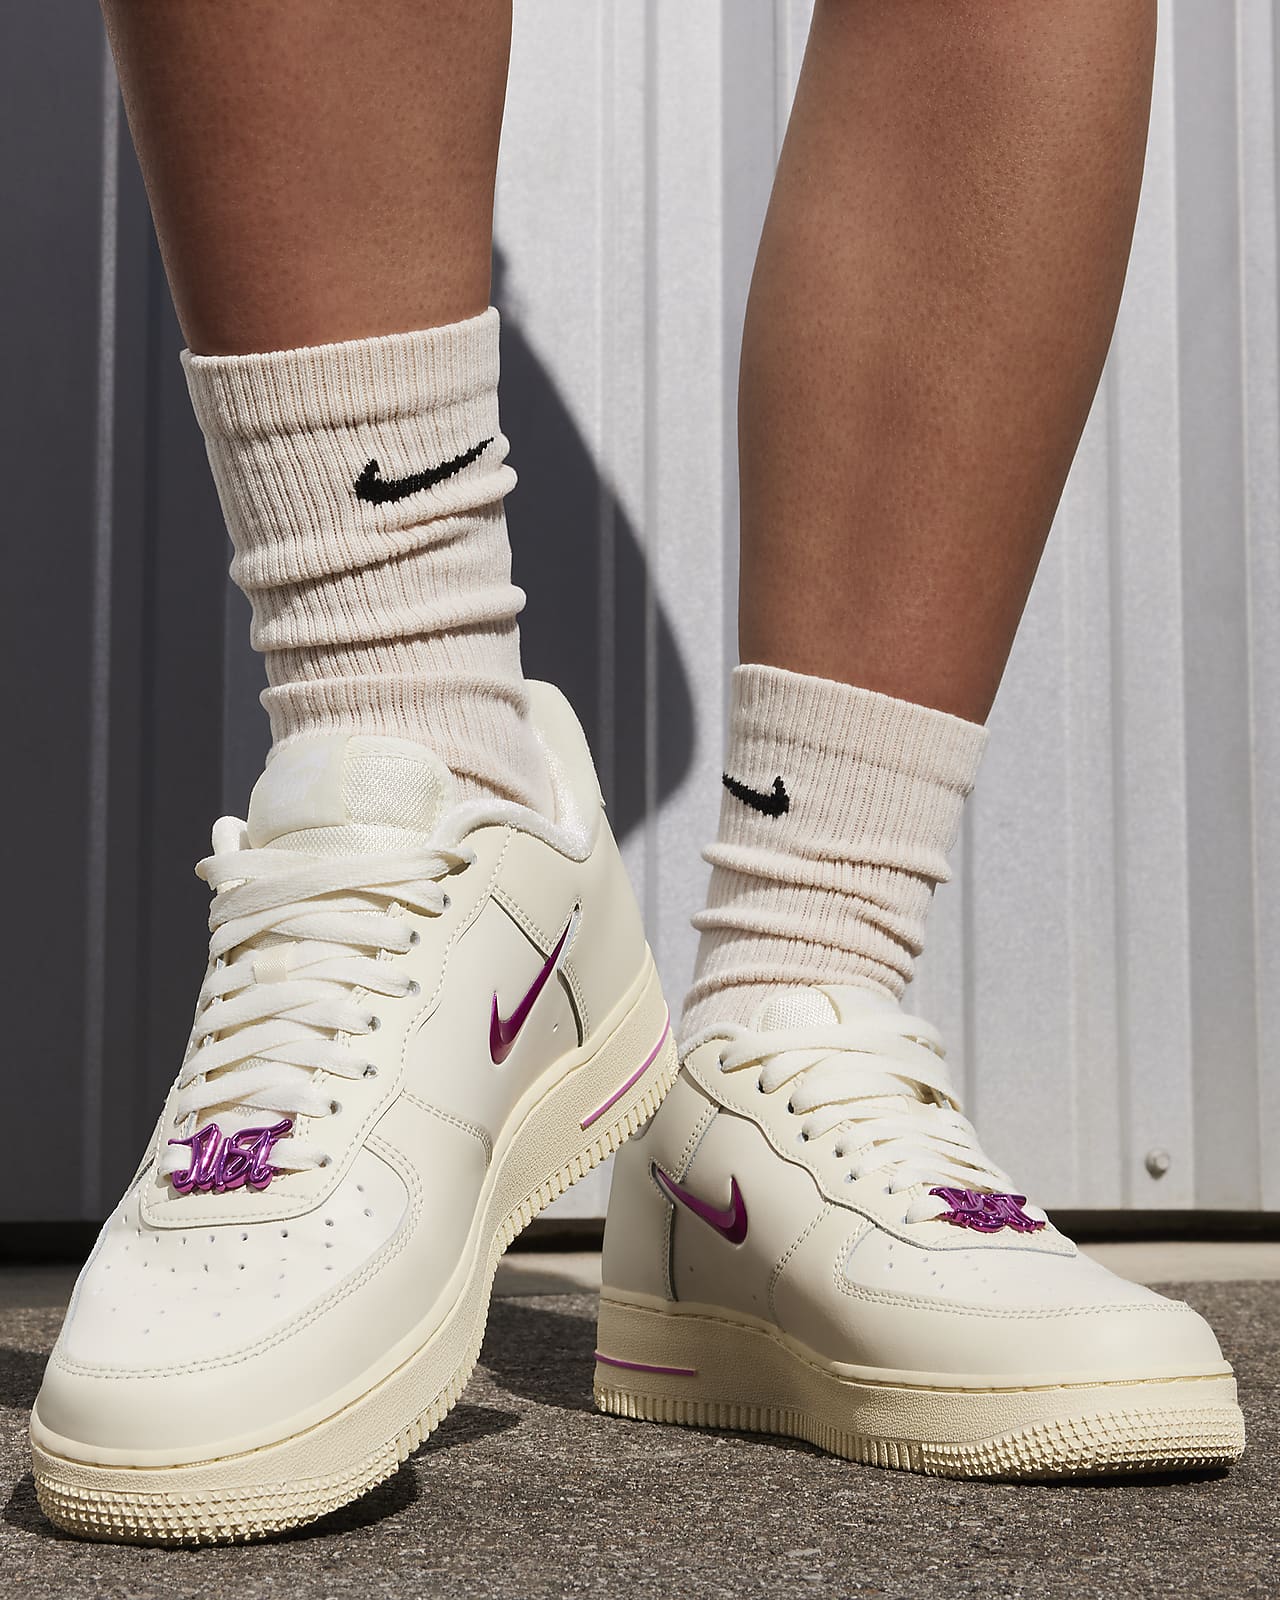 Staying ahead in style with the flawless fusion of comfort and trend. The  Nike One DF leggings paired with the iconic Nike Air Force 1 07